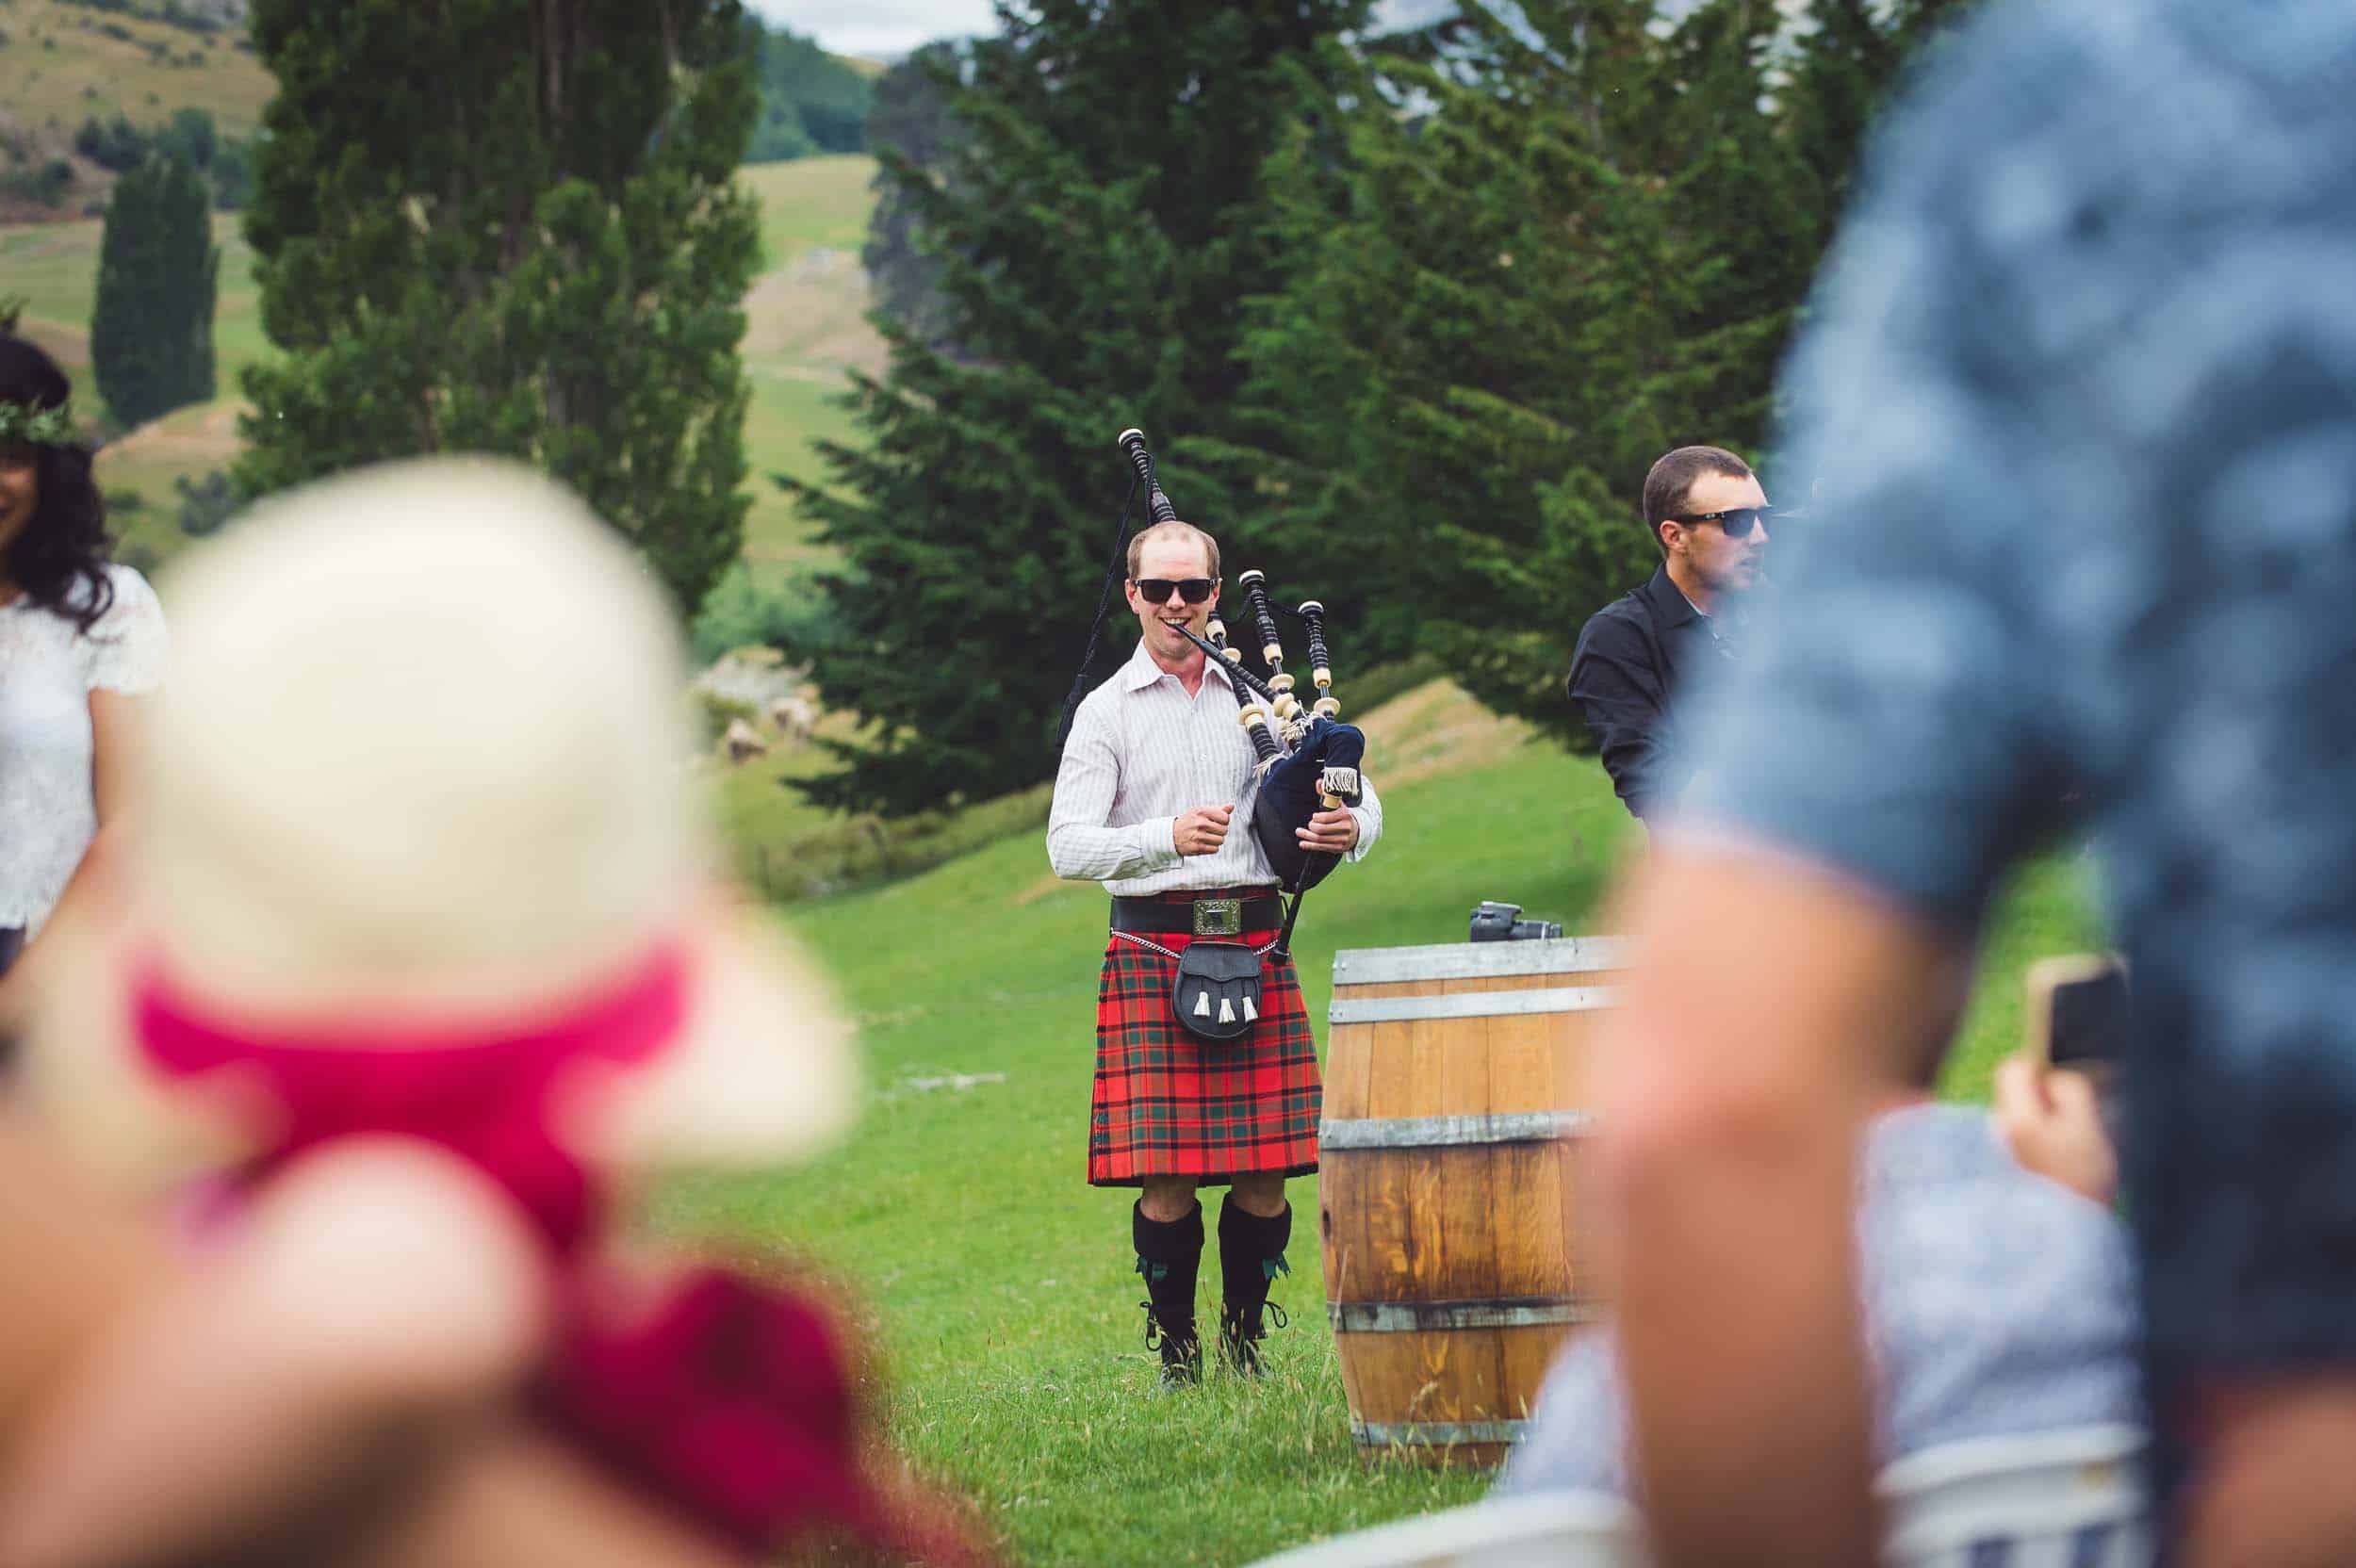 Queenstown Hill Station Wedding Middletons Woolshed